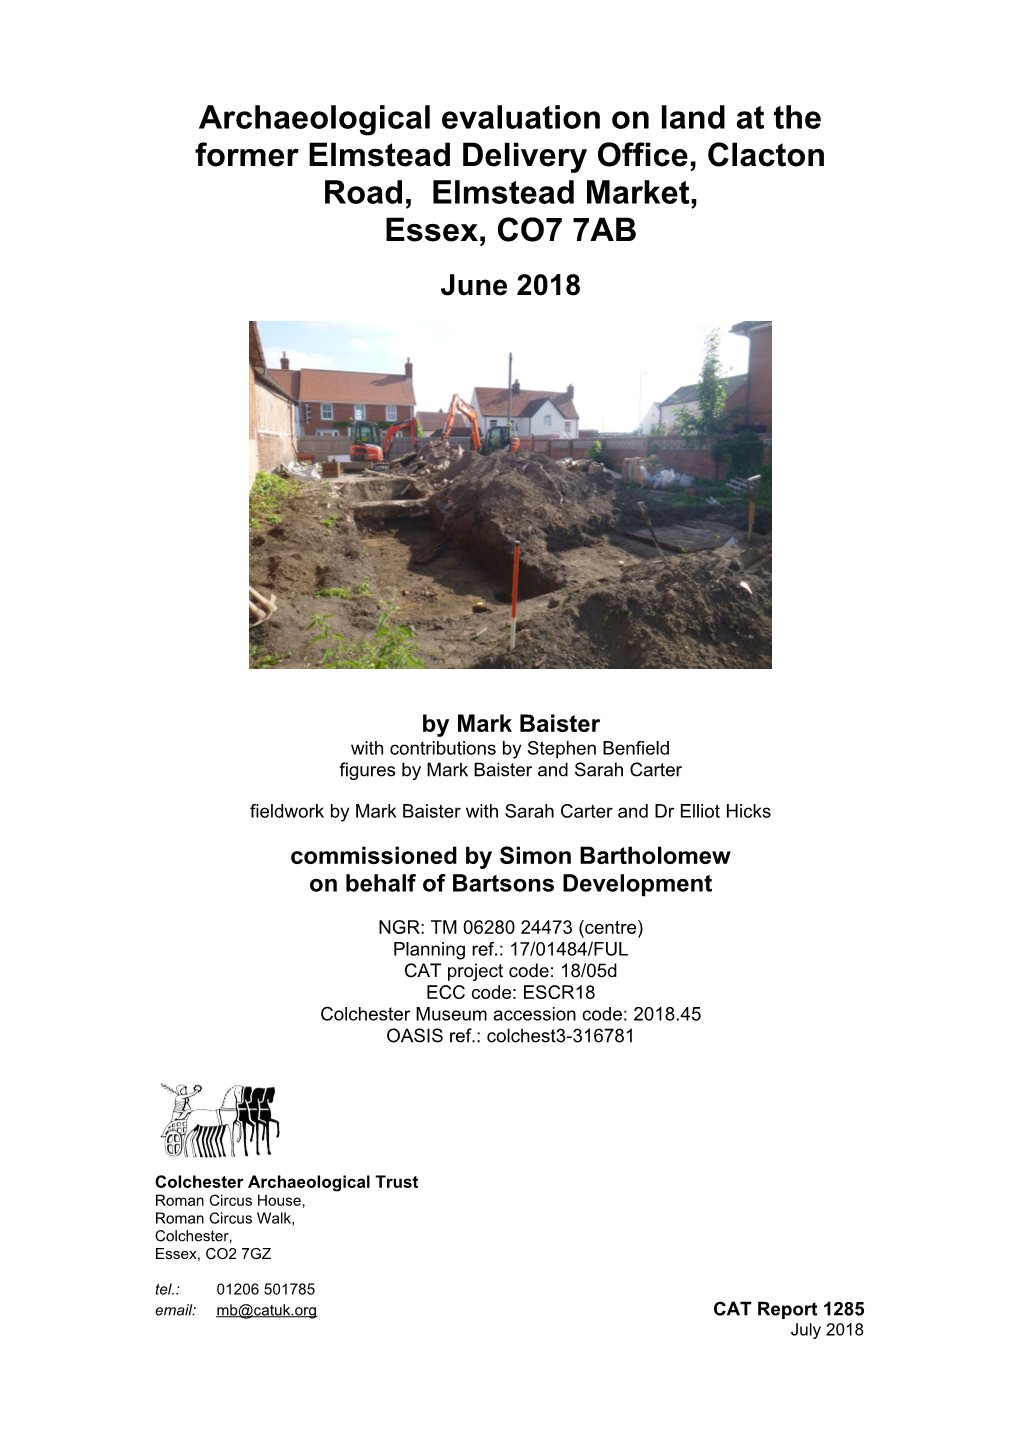 Archaeological Evaluation on Land at the Former Elmstead Delivery Office, Clacton Road, Elmstead Market, Essex, CO7 7AB June 2018